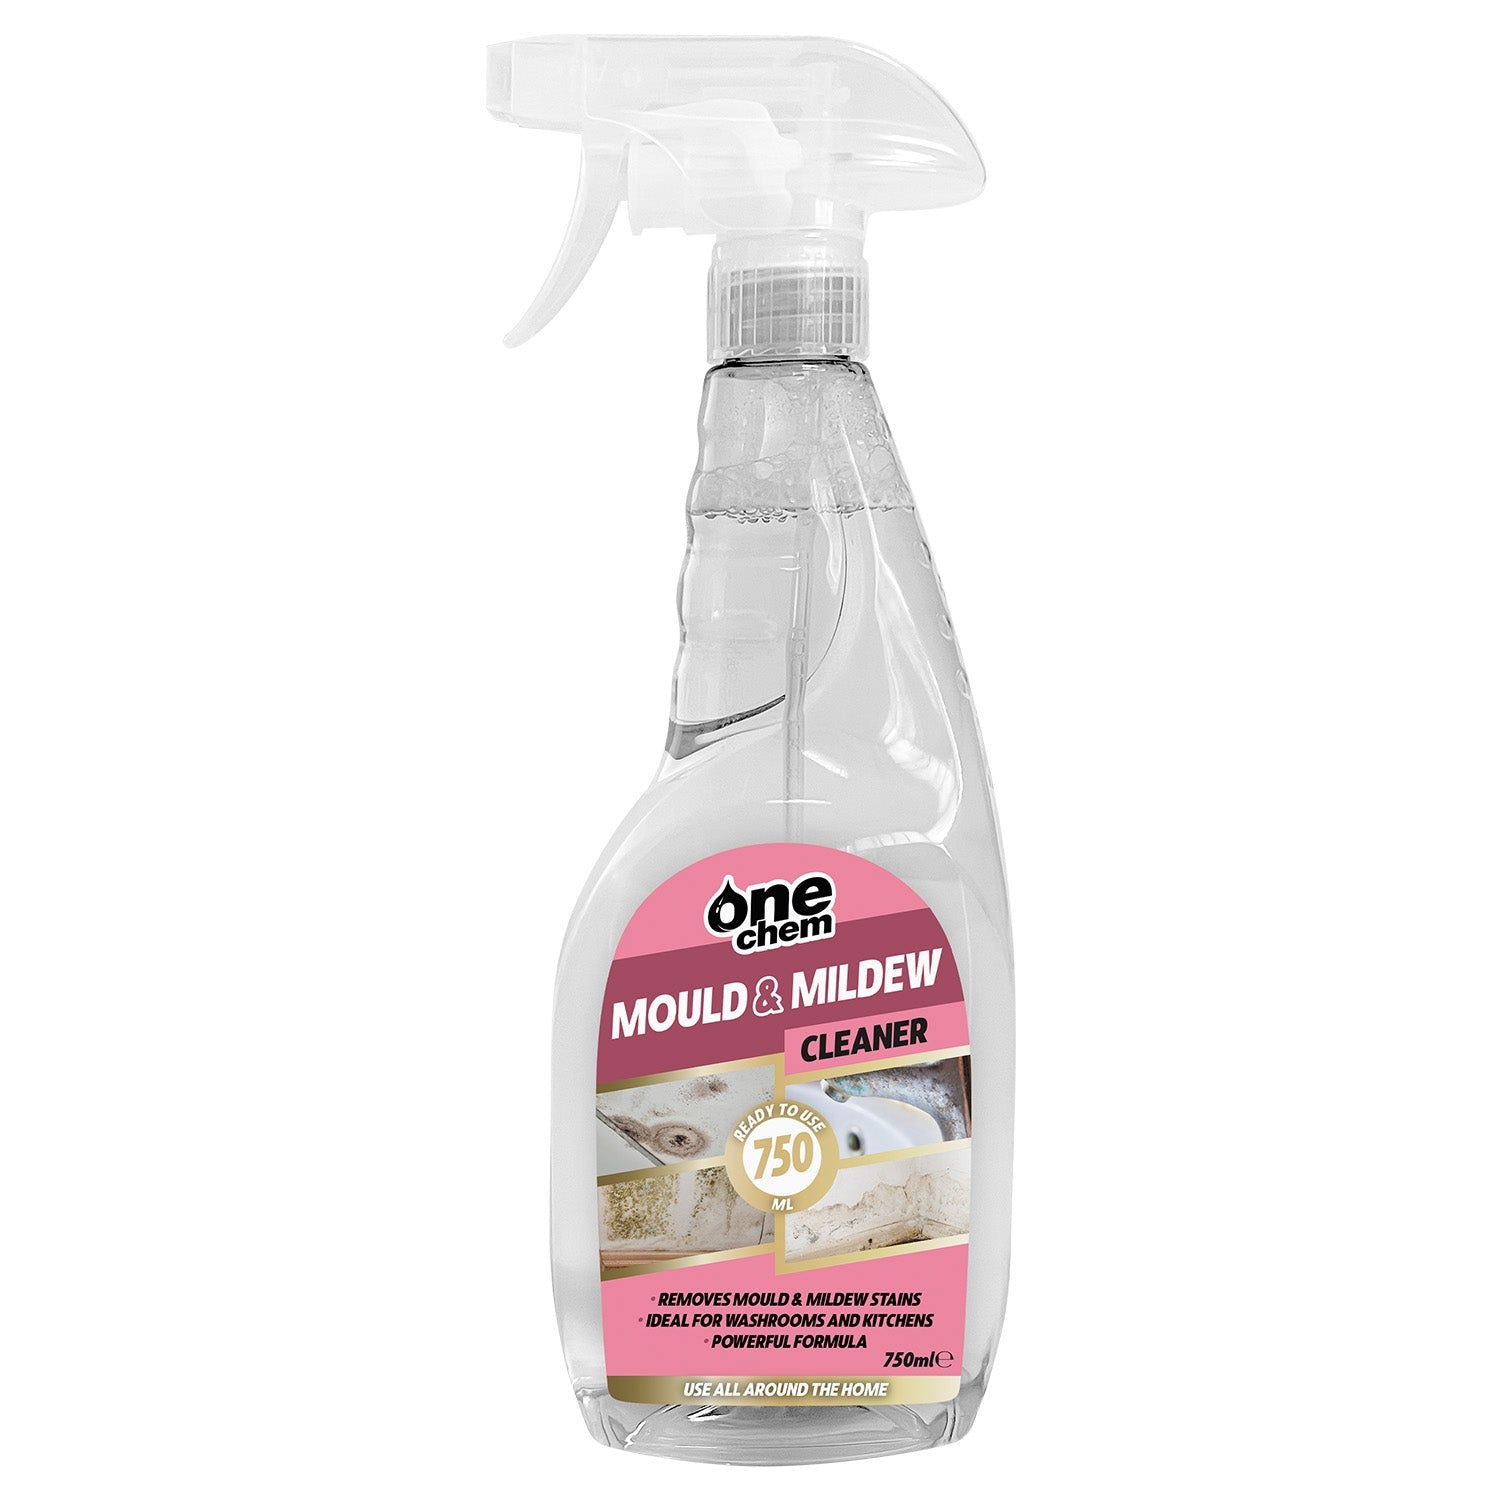 One Chem - Mould and Mildew Cleaner 2 x 750 ml